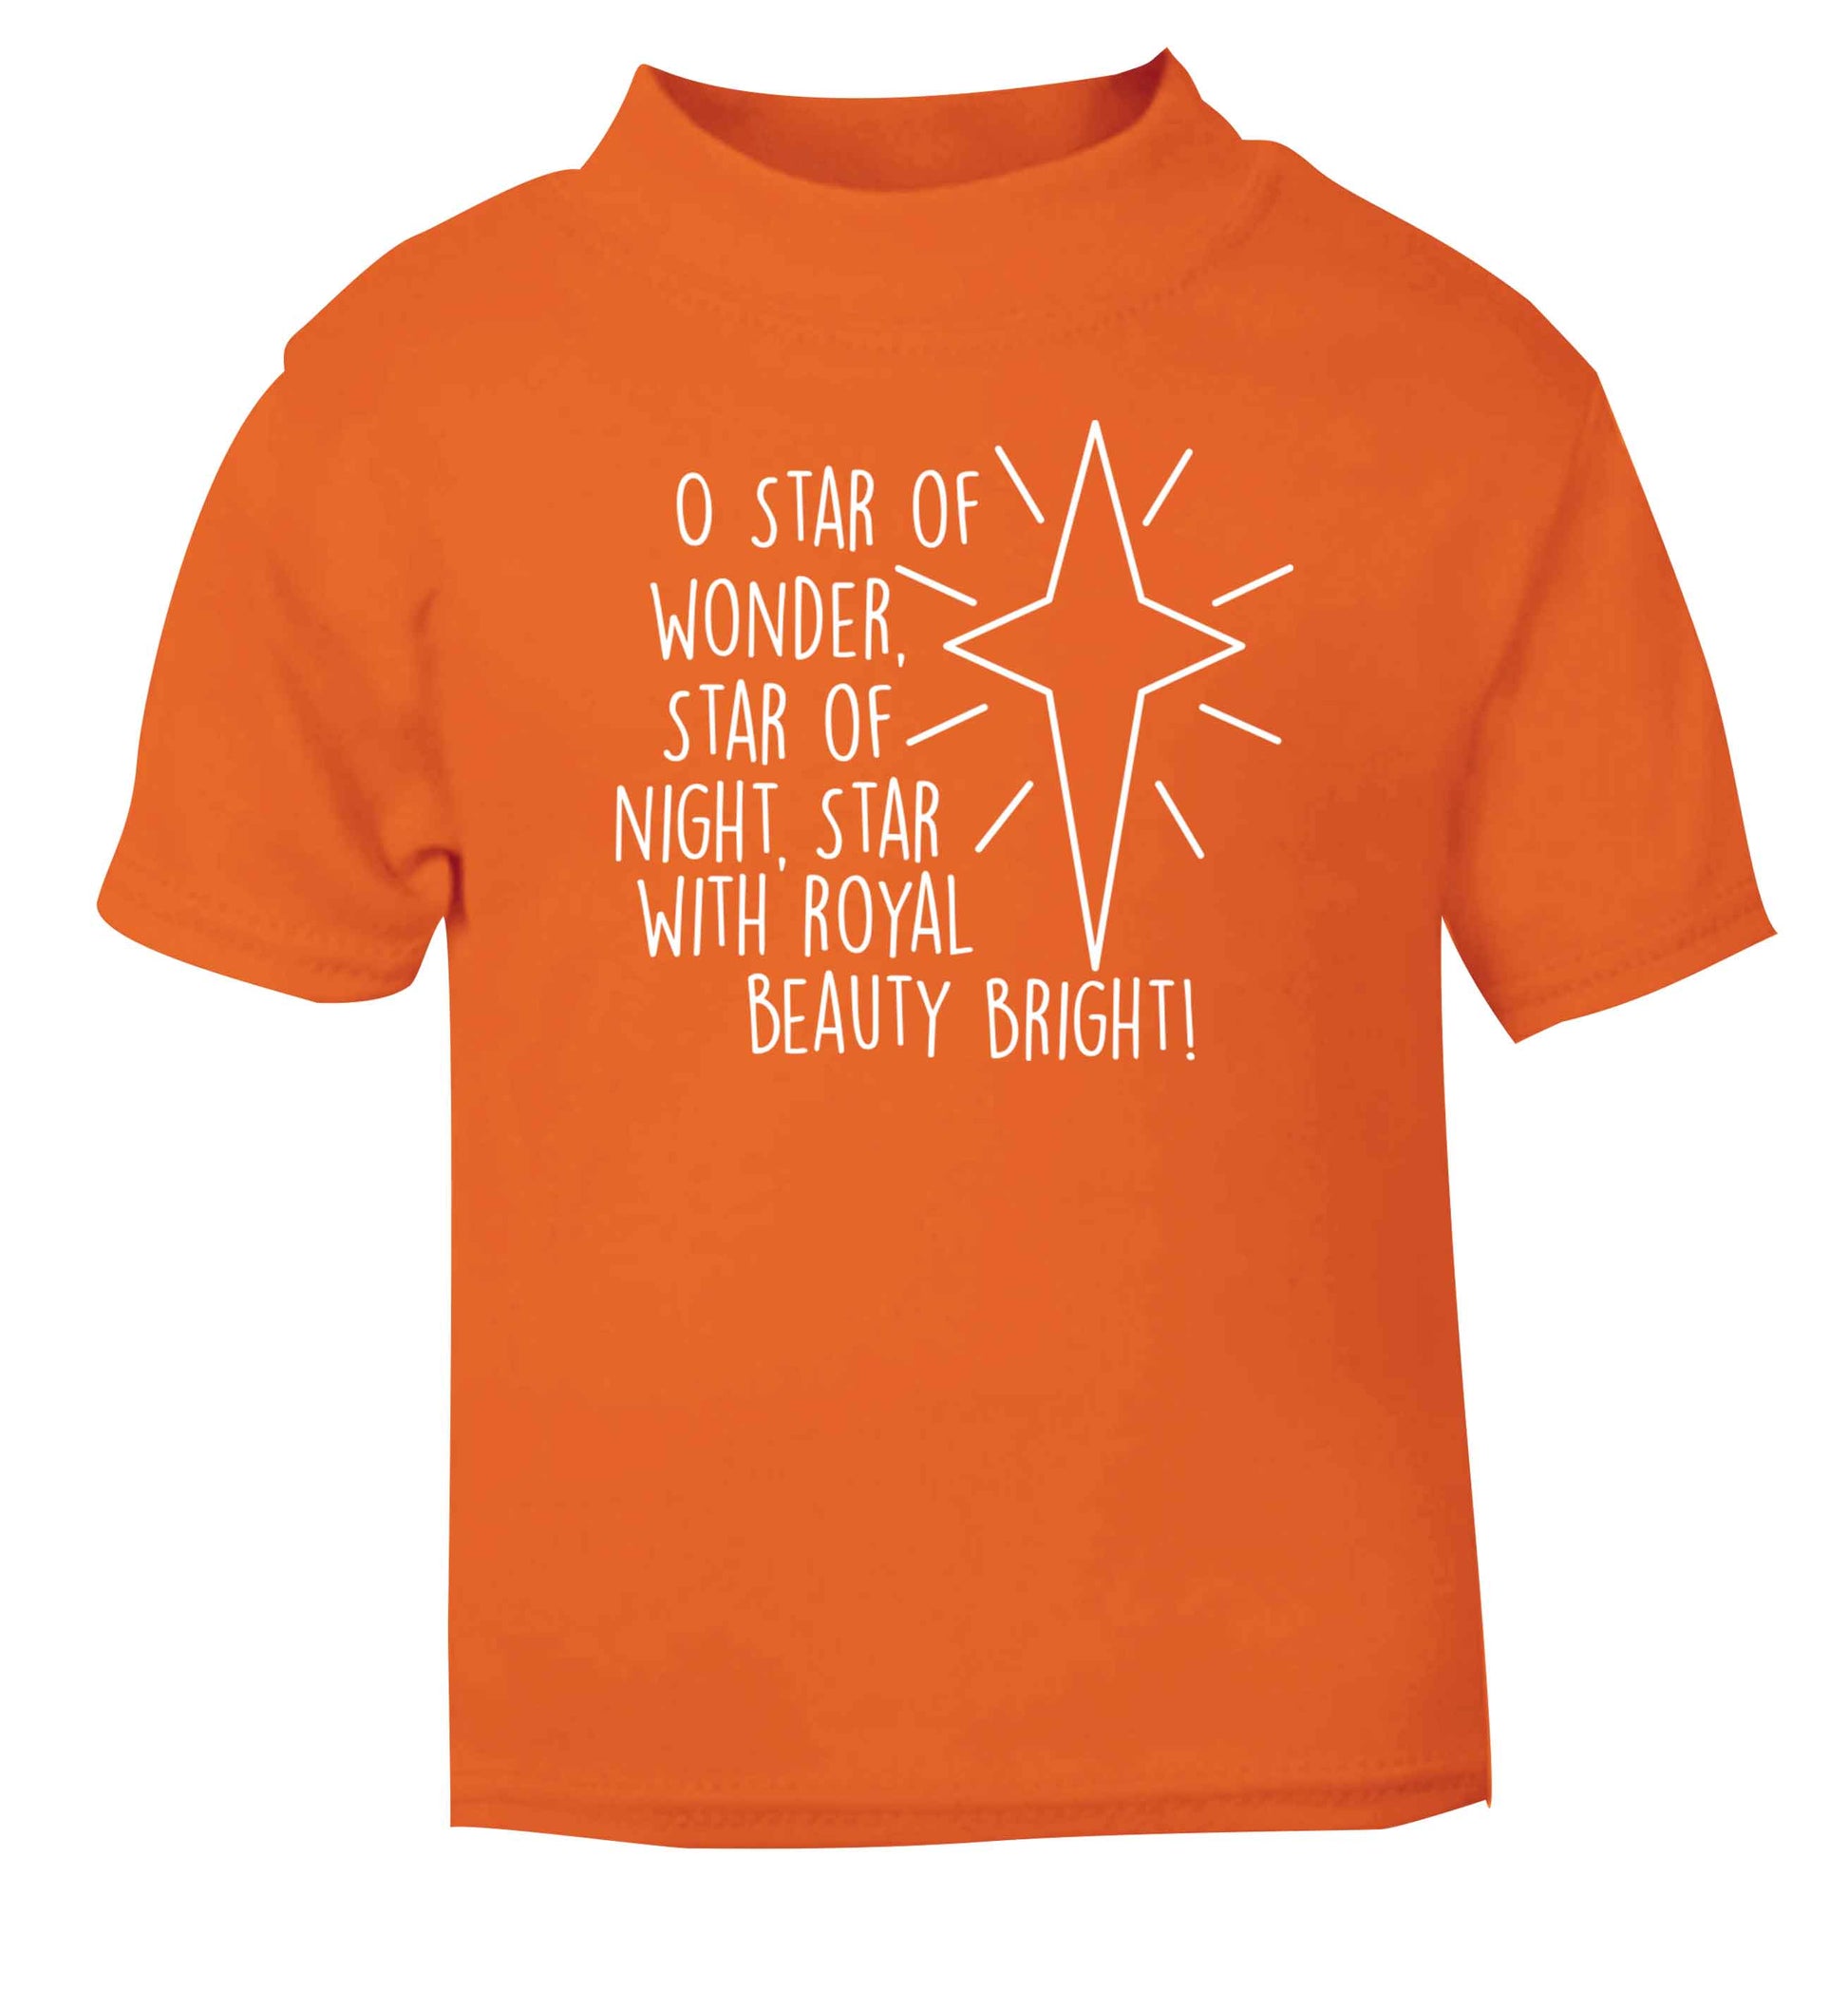 Oh star of wonder star of night, star with royal beauty bright orange baby toddler Tshirt 2 Years